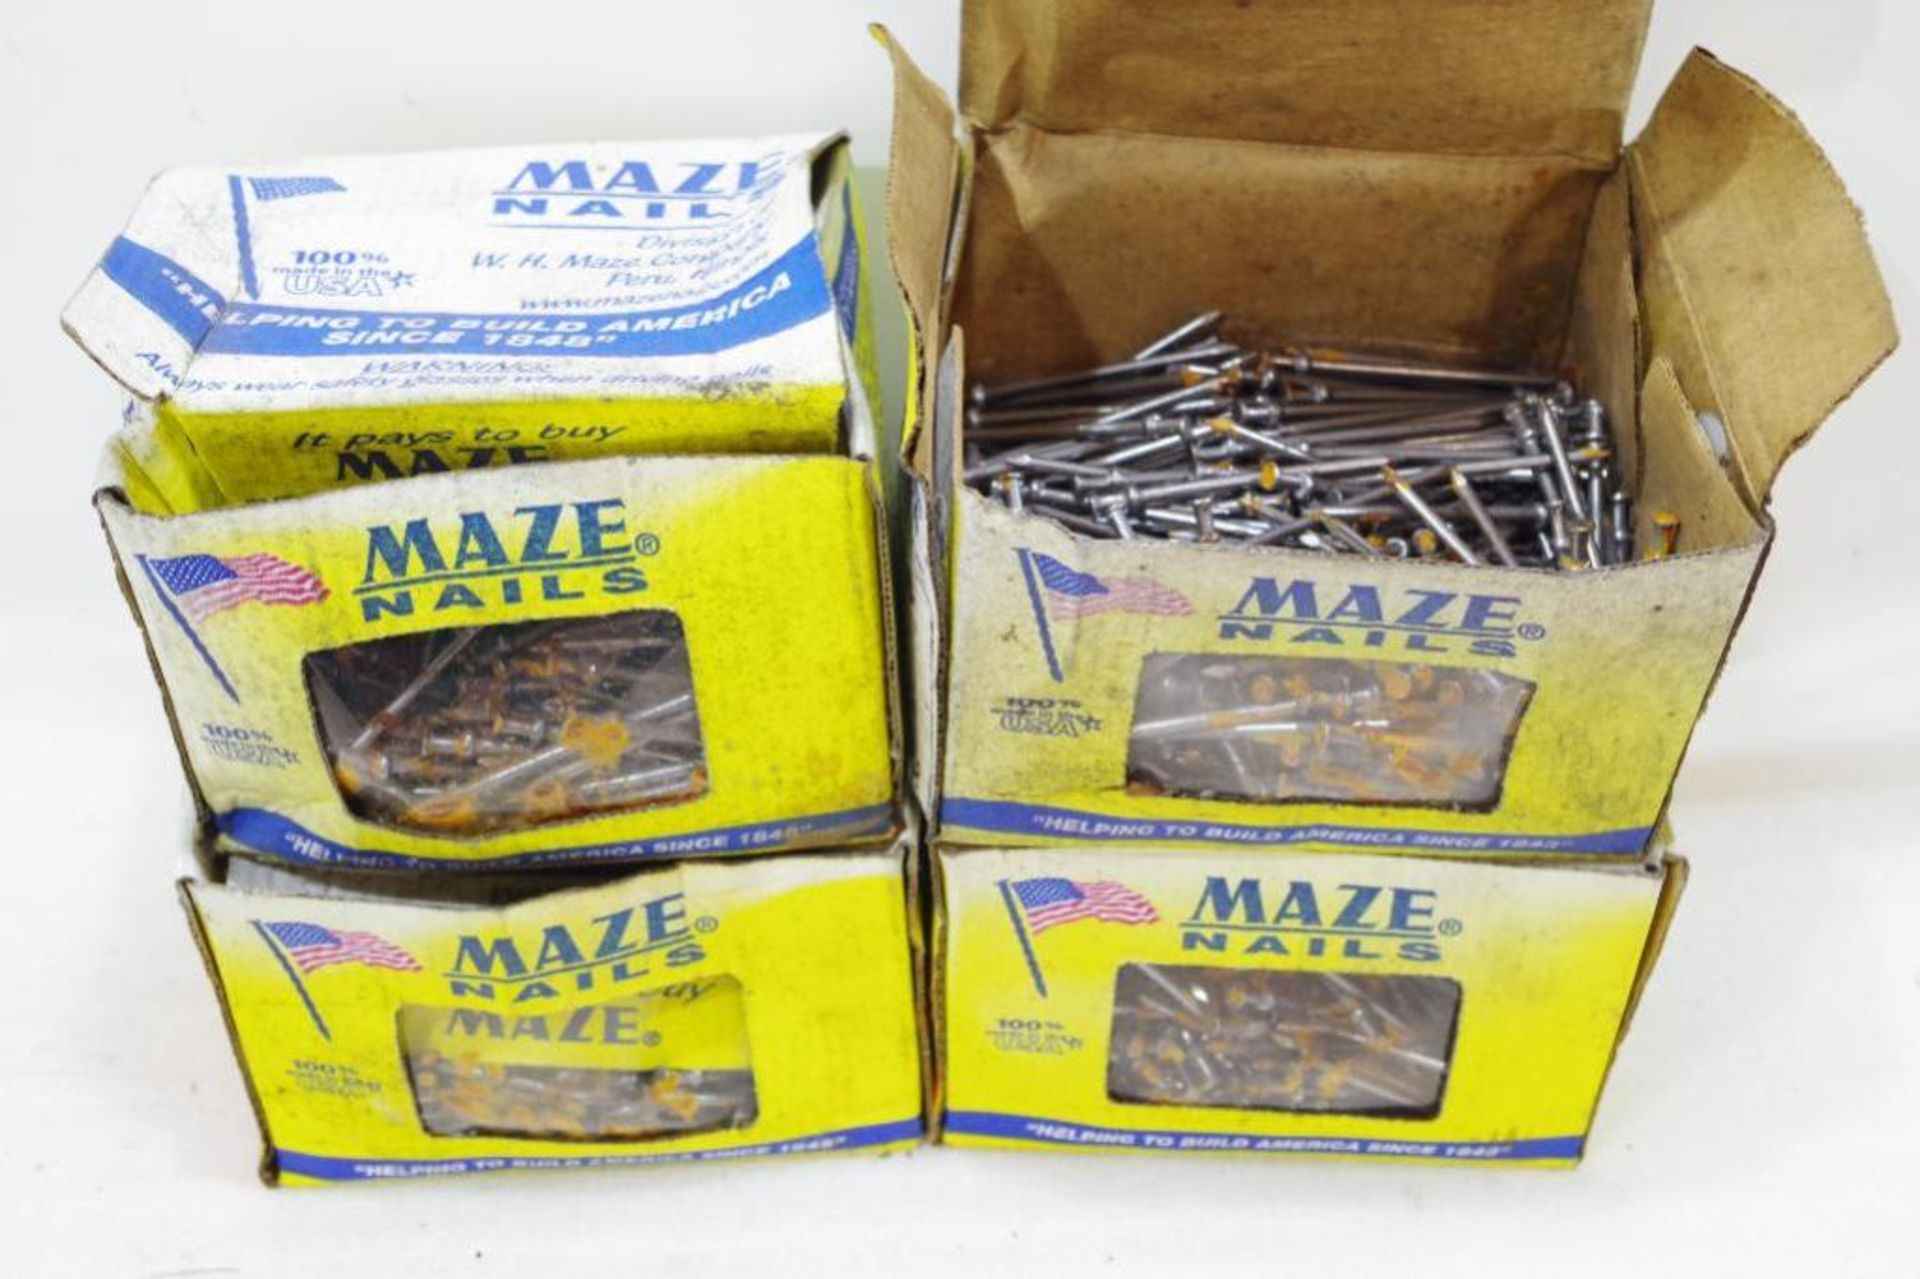 (20) Lbs. MAZE Bright Duplex Nails 2-1/2" 8d M/N DUP-8, Made in USA (4 Boxes of 5 Lbs. Each)